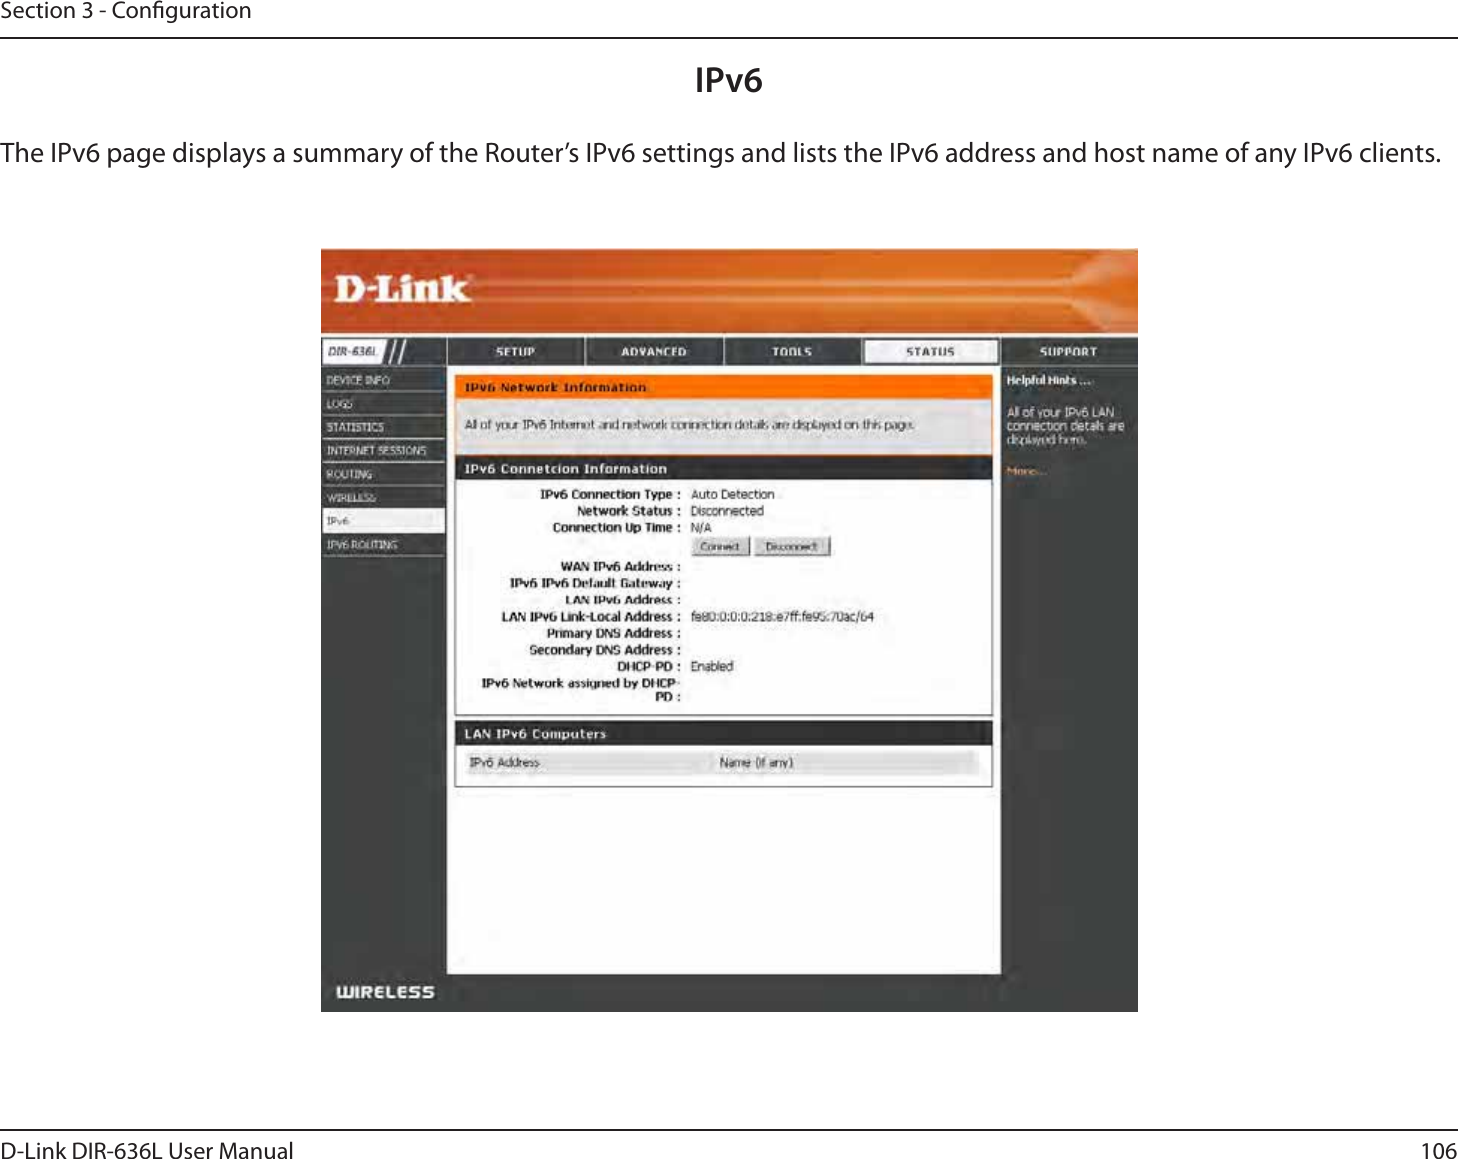 106D-Link DIR-636L User ManualSection 3 - CongurationIPv6The IPv6 page displays a summary of the Router’s IPv6 settings and lists the IPv6 address and host name of any IPv6 clients. 